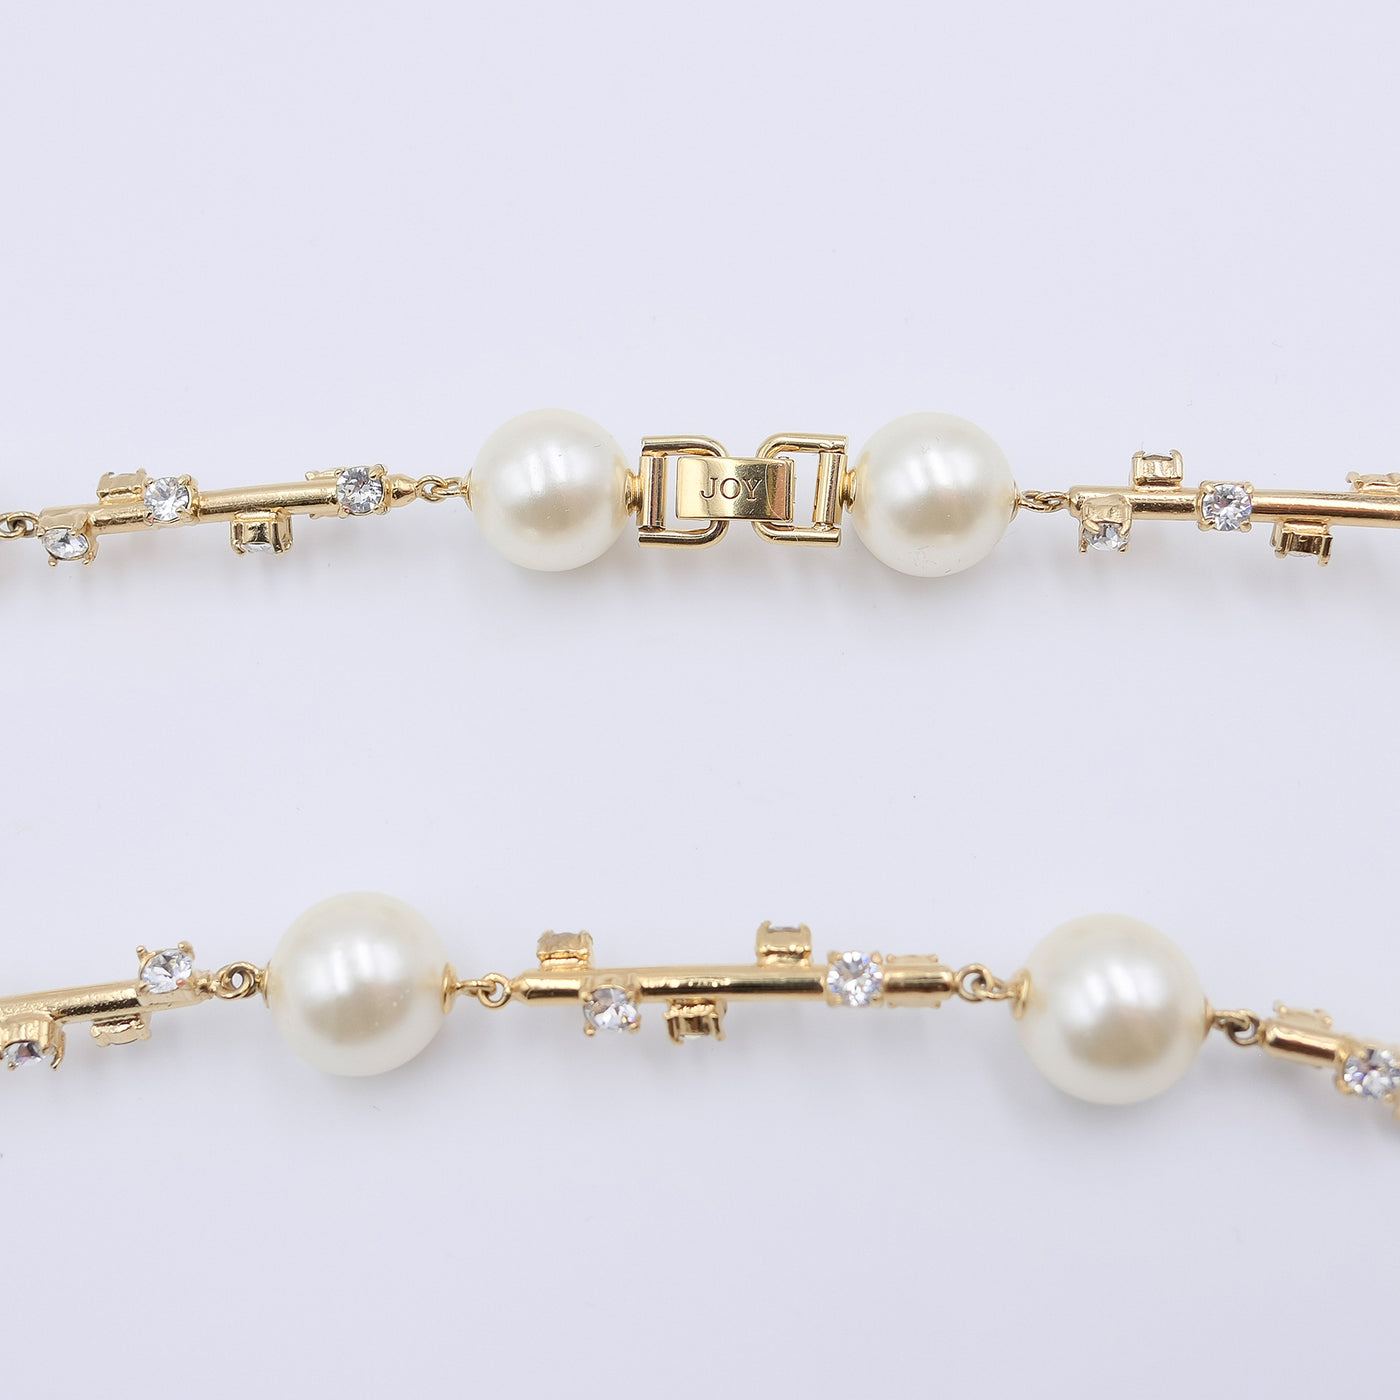 PEARL LAND <br> COLLIER